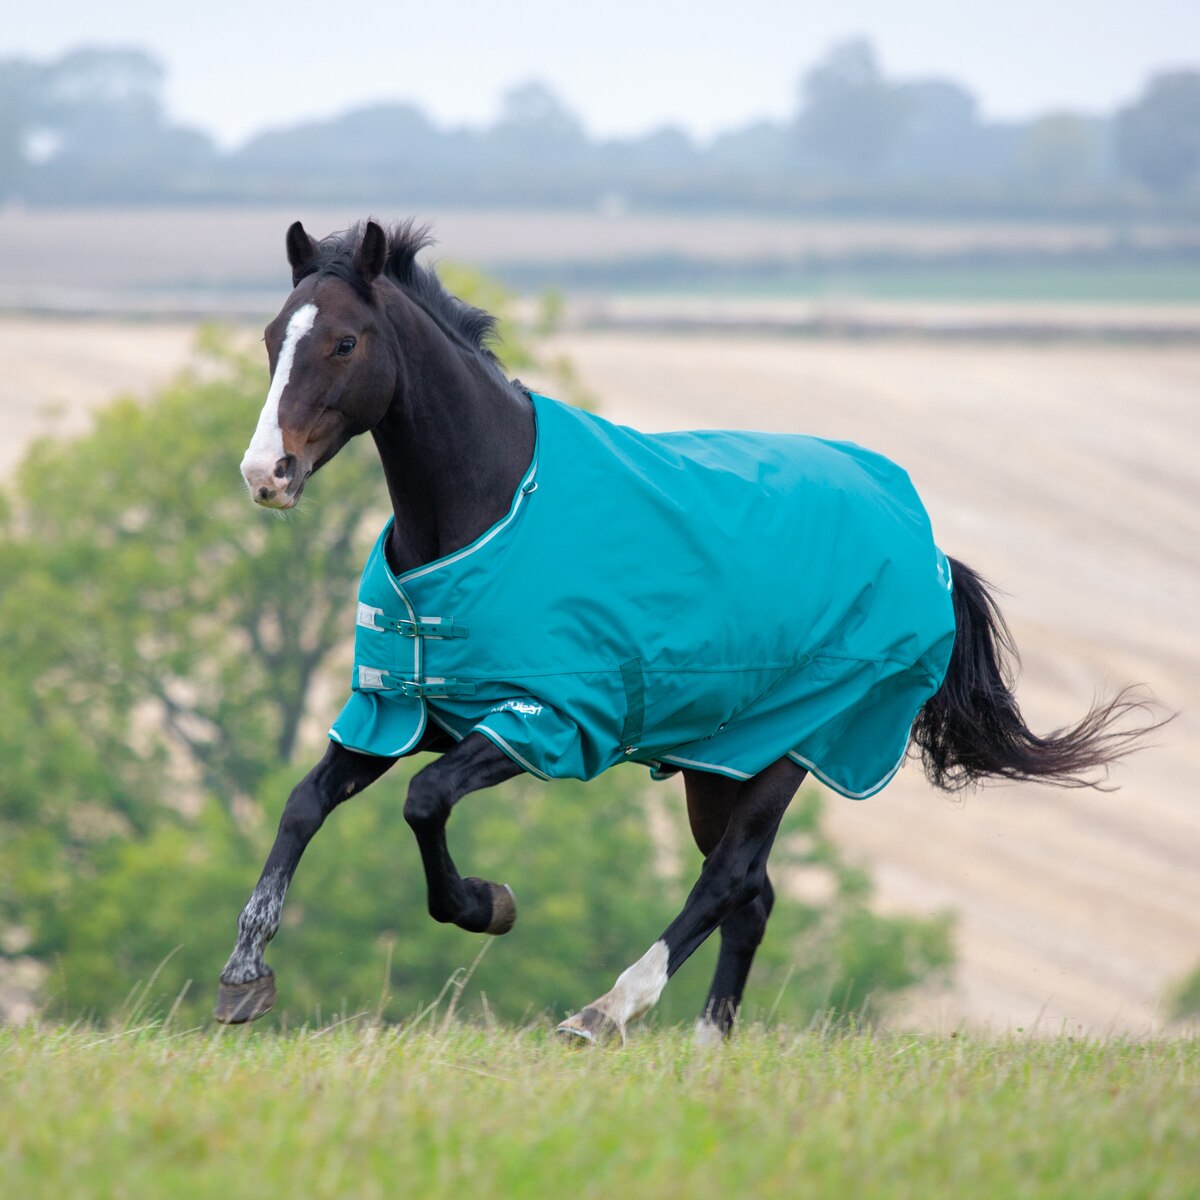 50g Lightweight Turnout Rug Shires Tempest Fixed Neck Combo Horse Rug Blue 